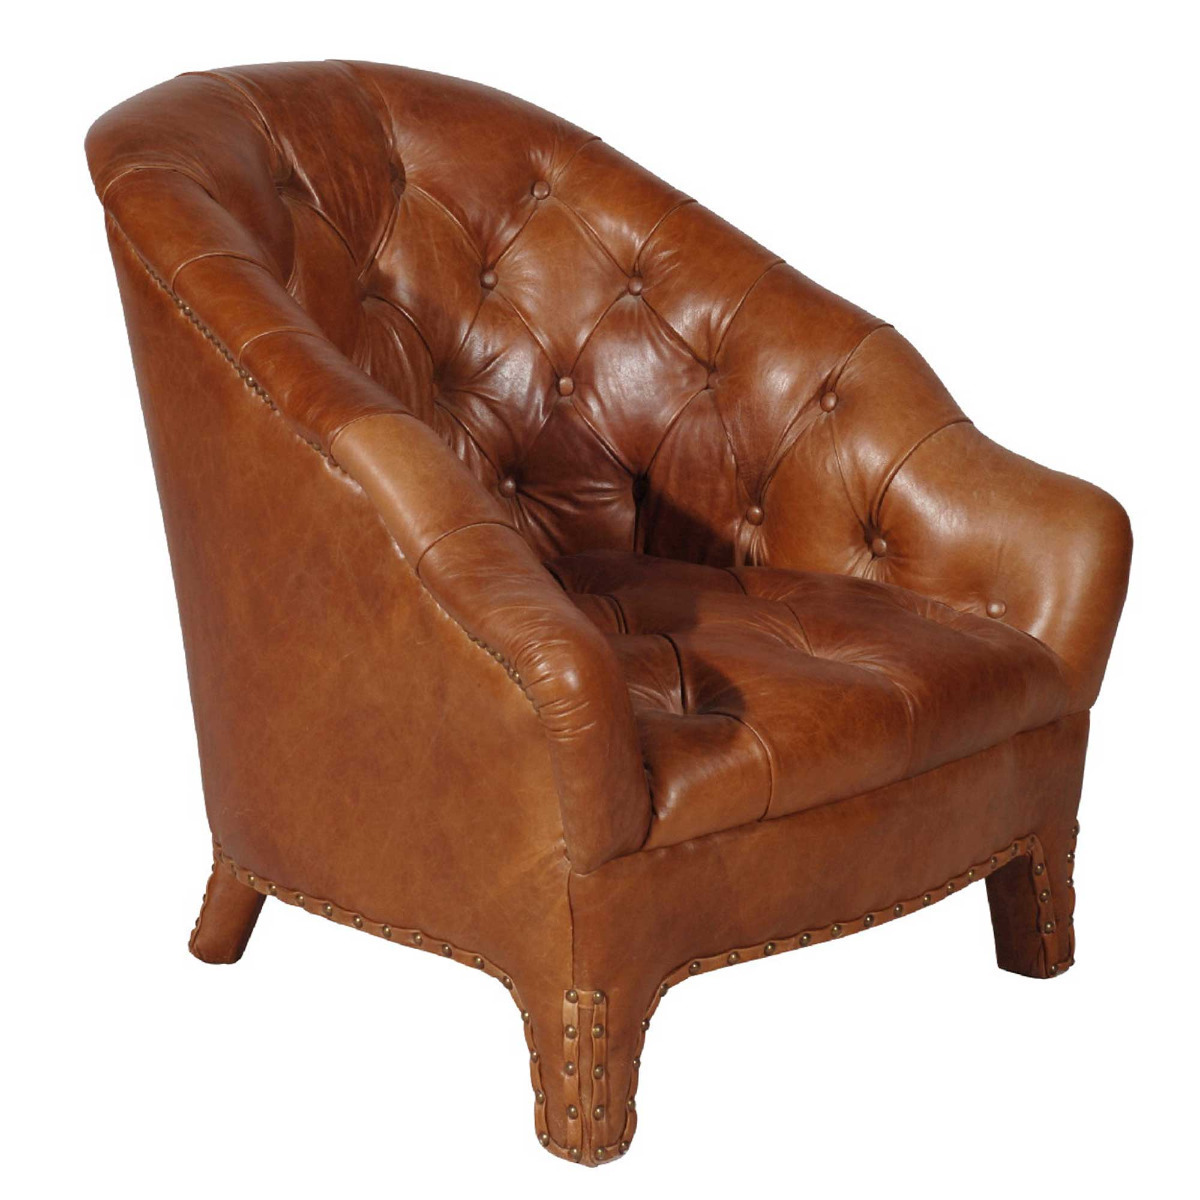 Timothy Oulton Branco Tub Chair, Brown Leather - Barker & Stonehouse - image 1